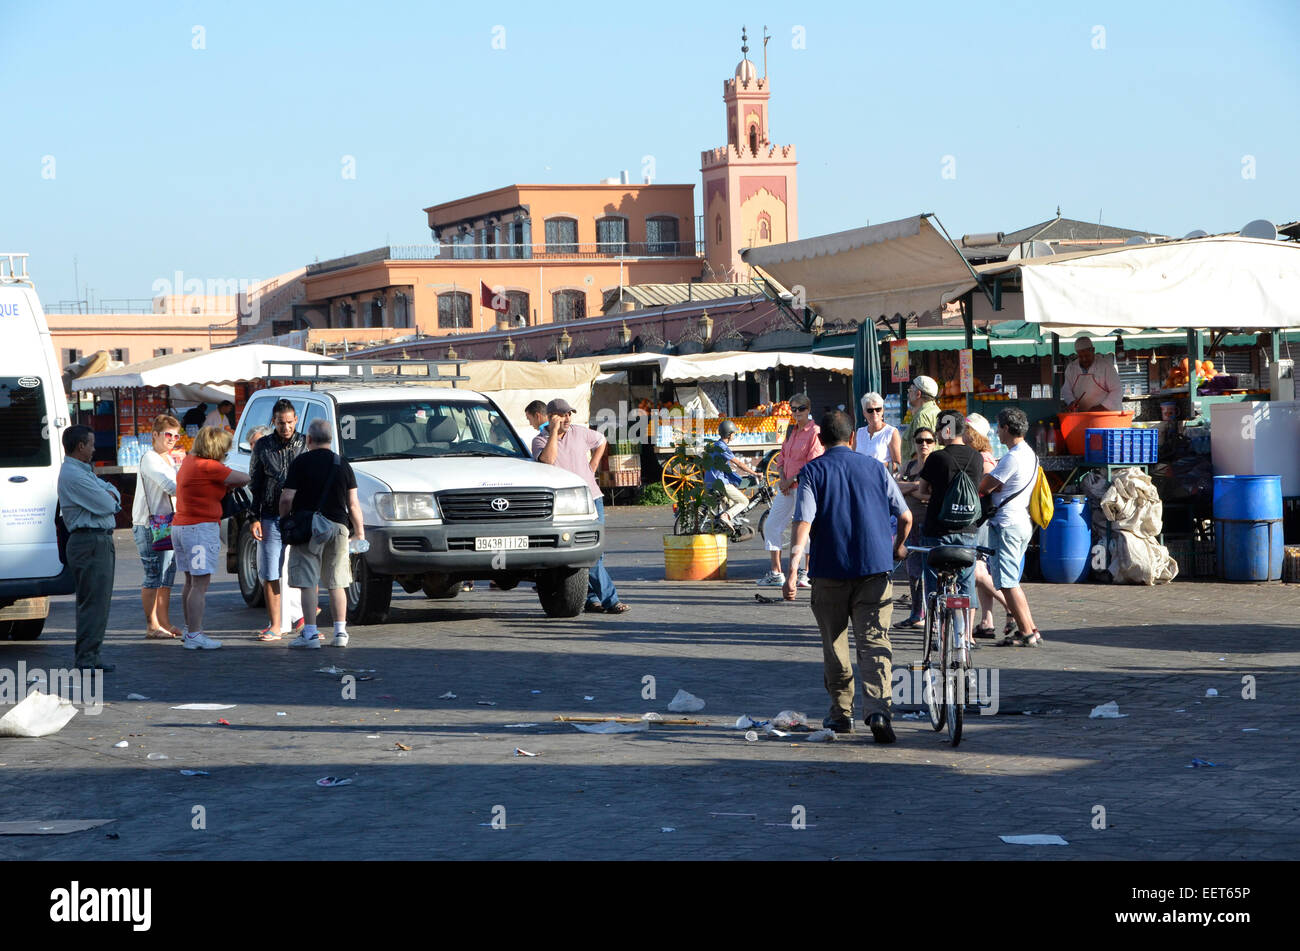 Tourists gathering for day trips in the main square, Marrakesh, Morocco Stock Photo